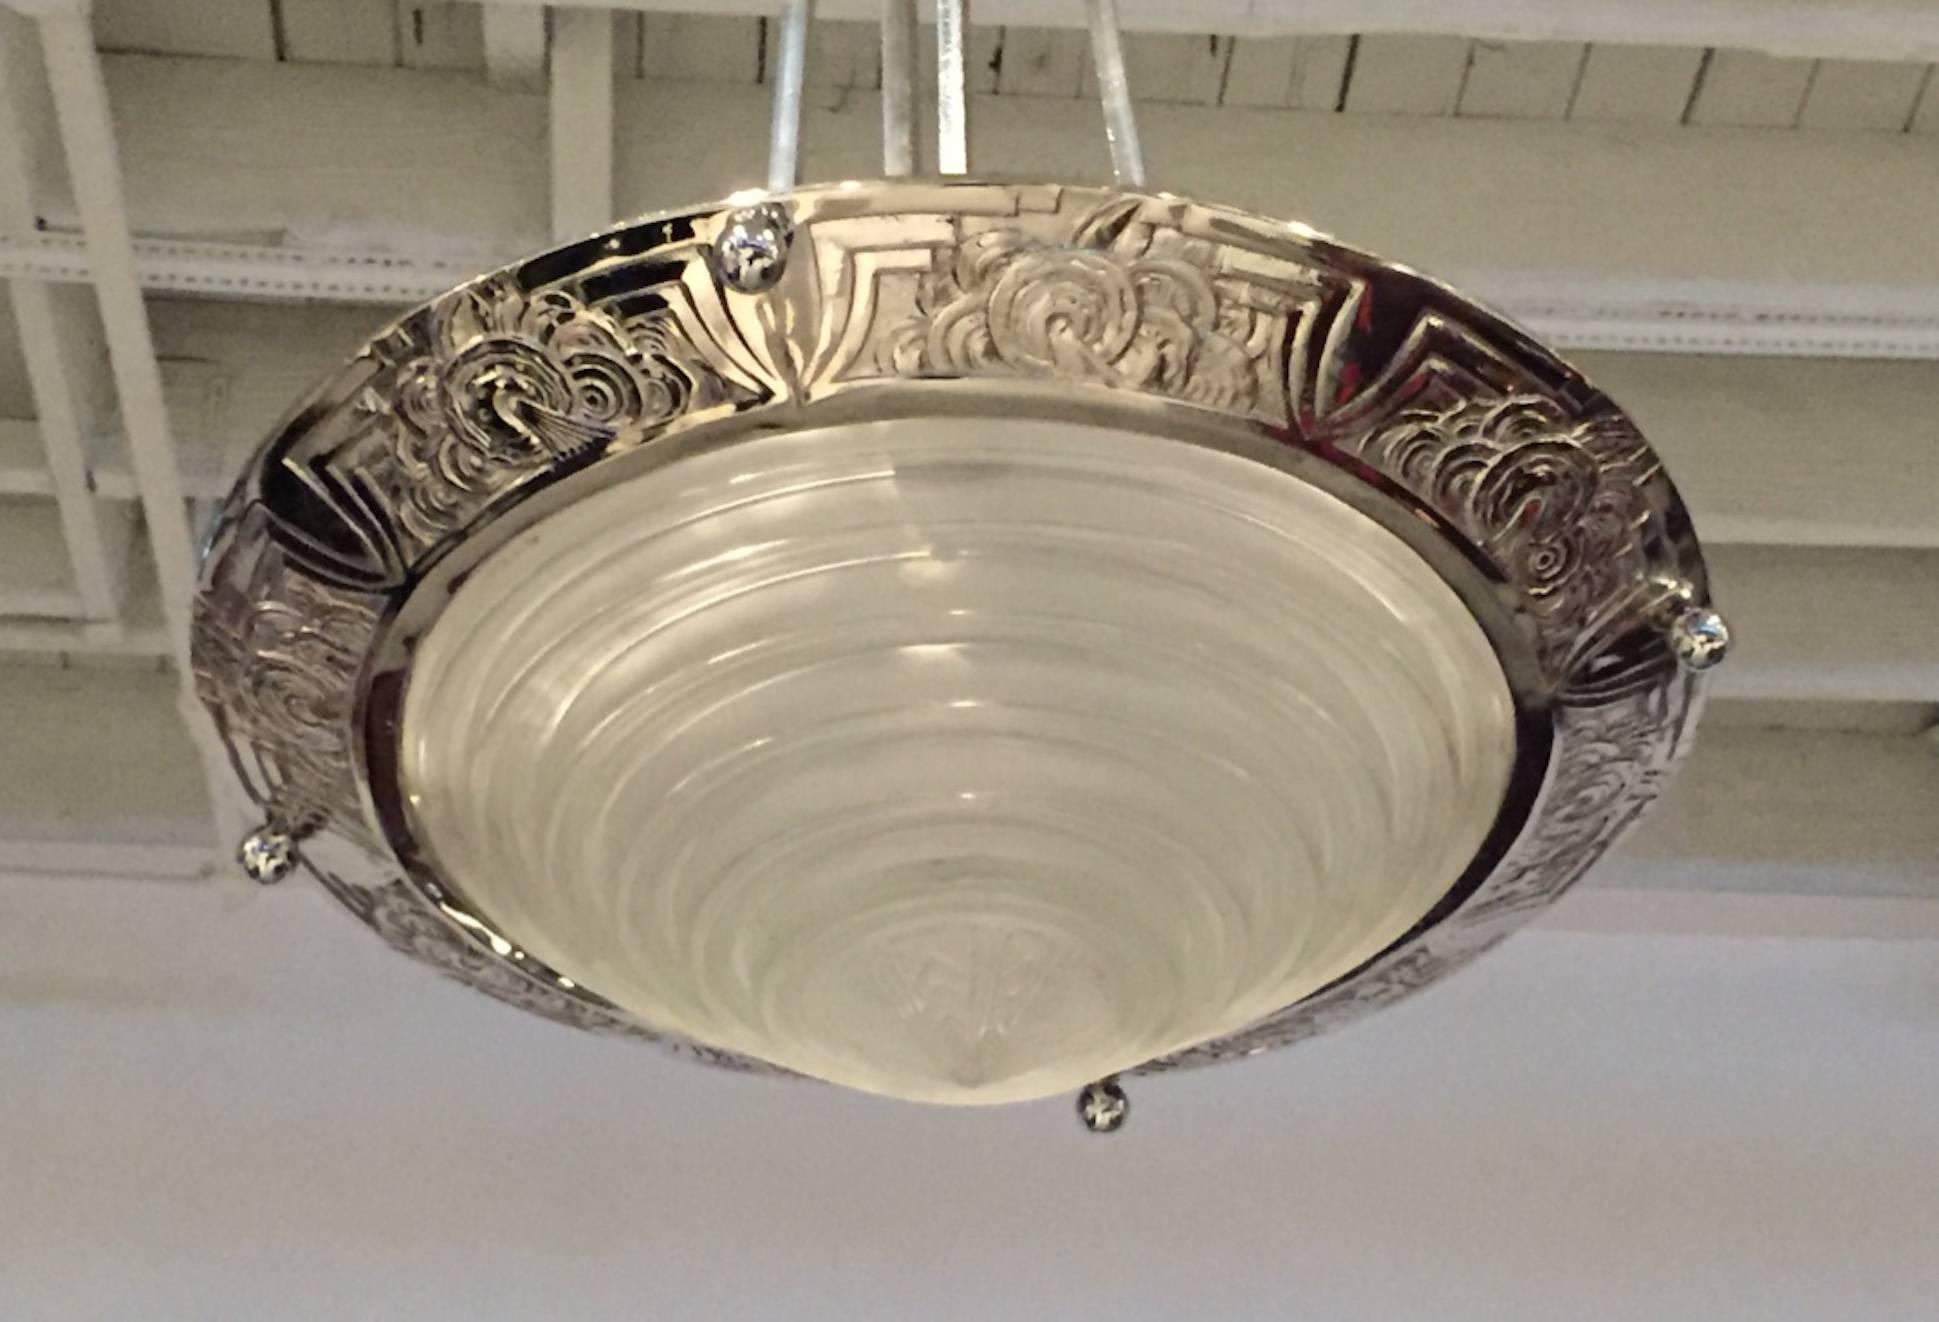 A stunning French Art Deco chandelier signed by G. Leleu. With a beautiful center bowl in clear frosted molded glass with ribbed and geometric motif. Polished details on a nickel bronze frame with geometric design and beautiful matching ceiling